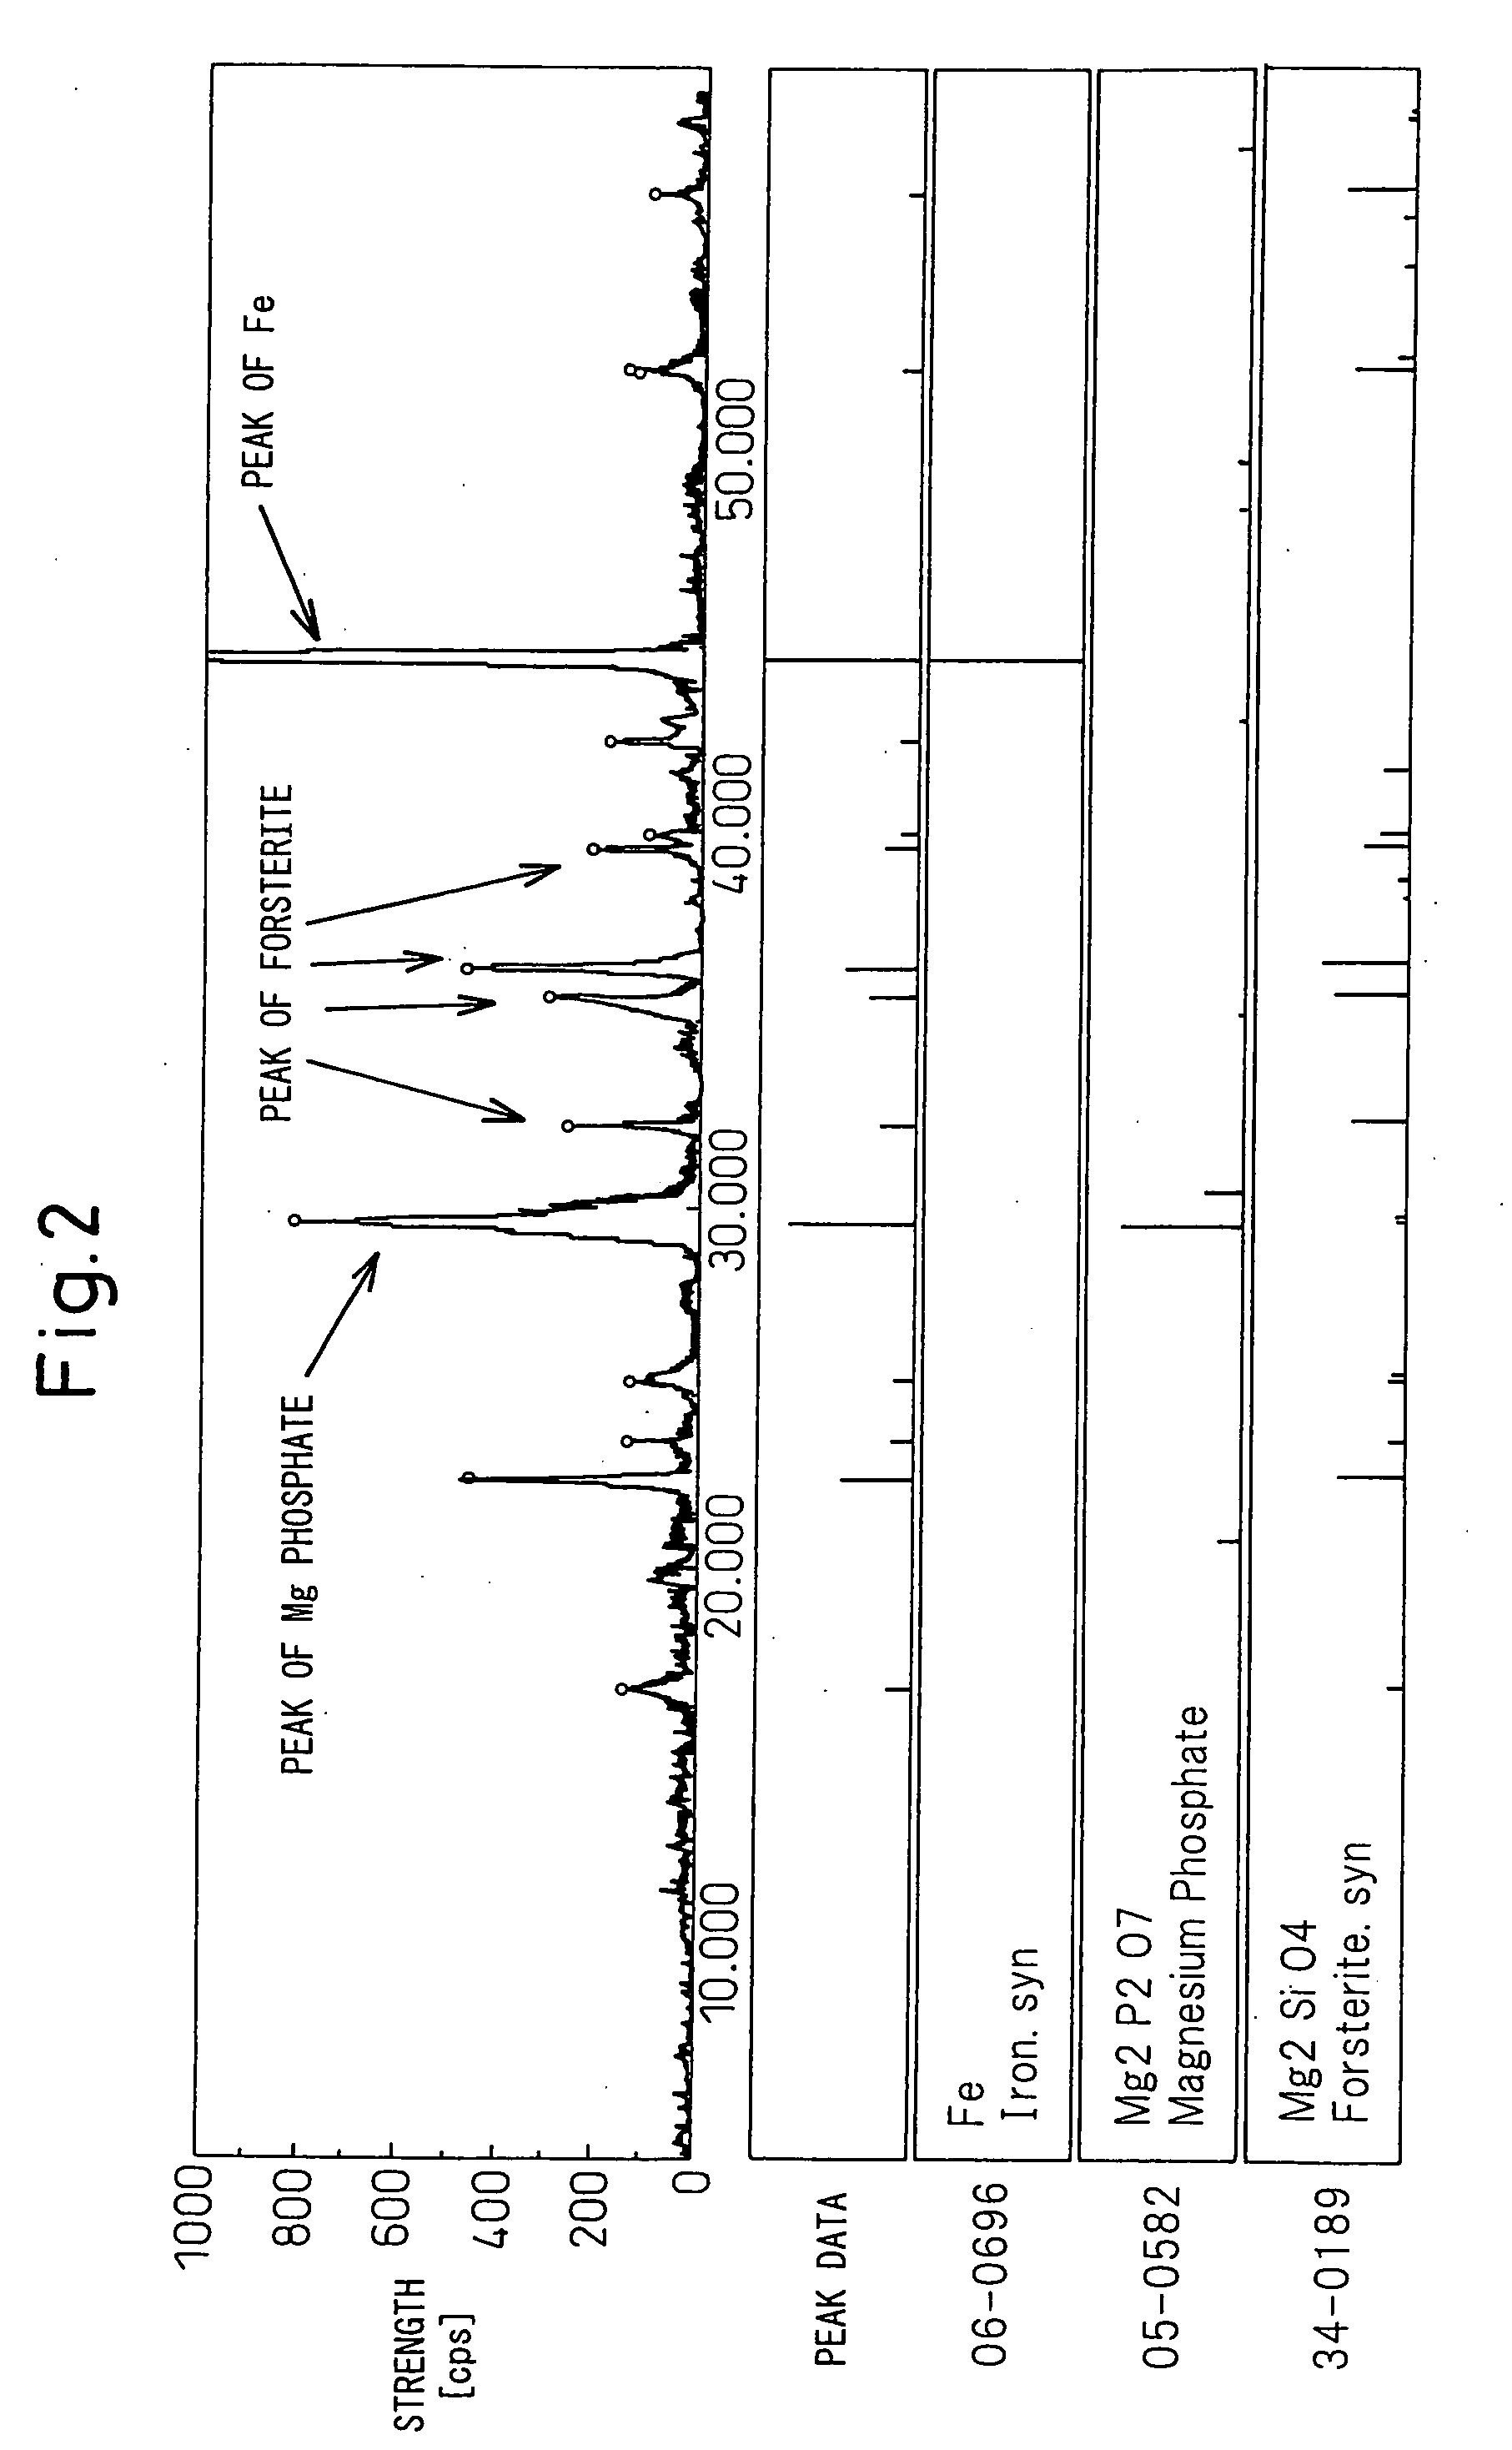 Grain-Oriented Electrical Steel Sheet Having High Tensile Strength Insulating Film and Method of Treatment of Such Insulating Film